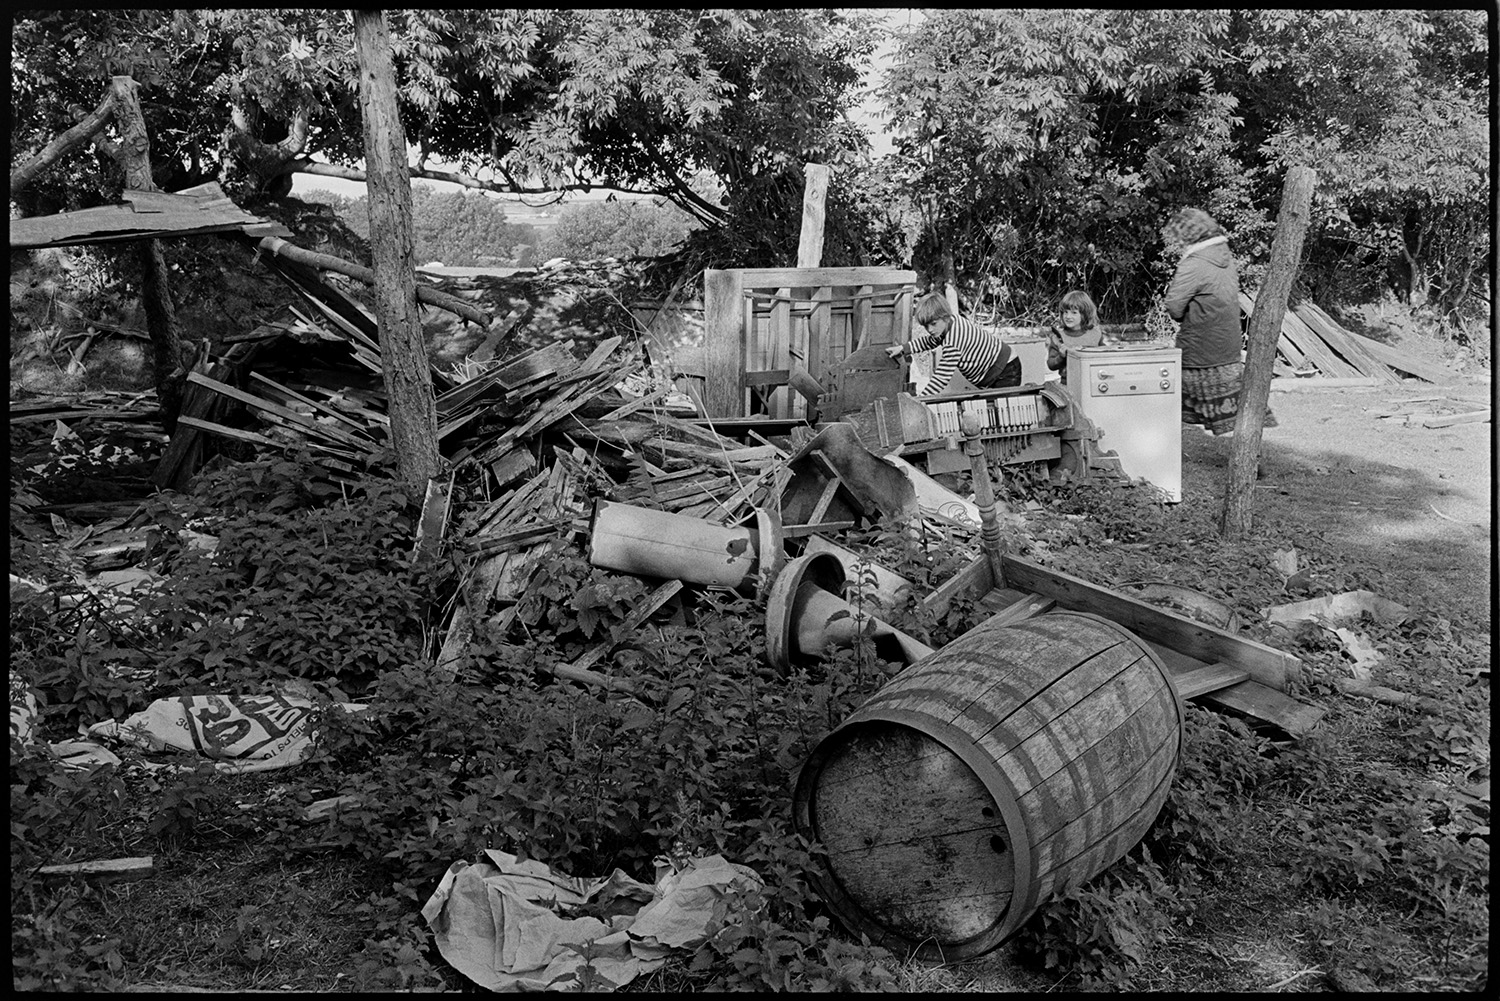 Junk in corner of field.
[Two children and a woman looking at a pile of overgrown junk in the corner of a field at Ashwell, Dolton, including a wooden barrel, a washing machine and timber.]